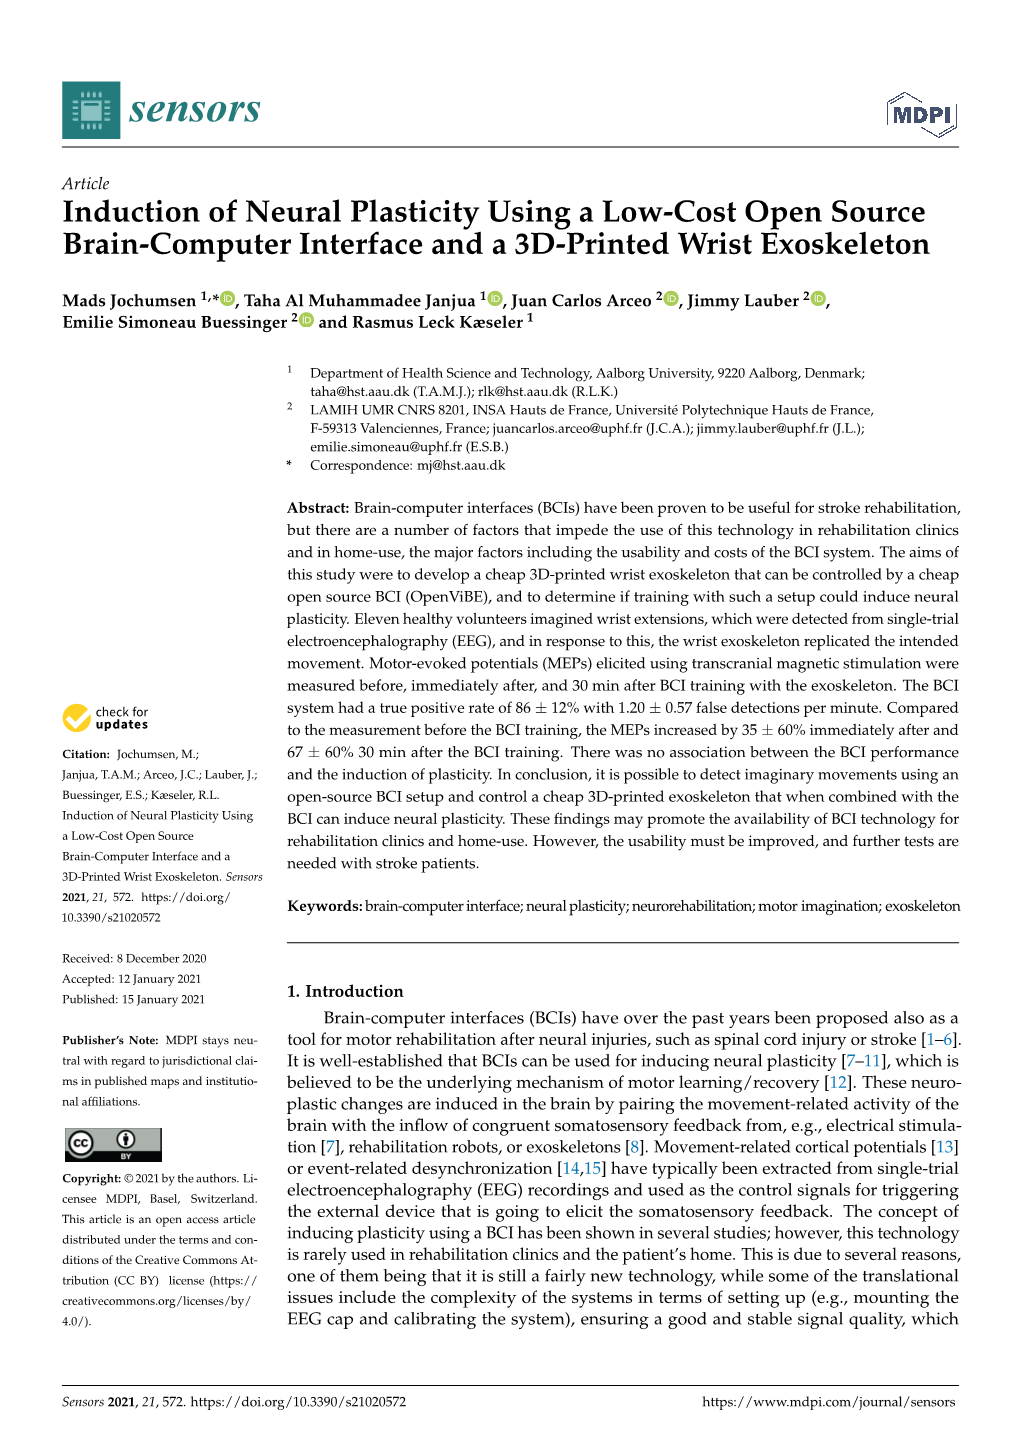 Induction of Neural Plasticity Using a Low-Cost Open Source Brain-Computer Interface and a 3D-Printed Wrist Exoskeleton